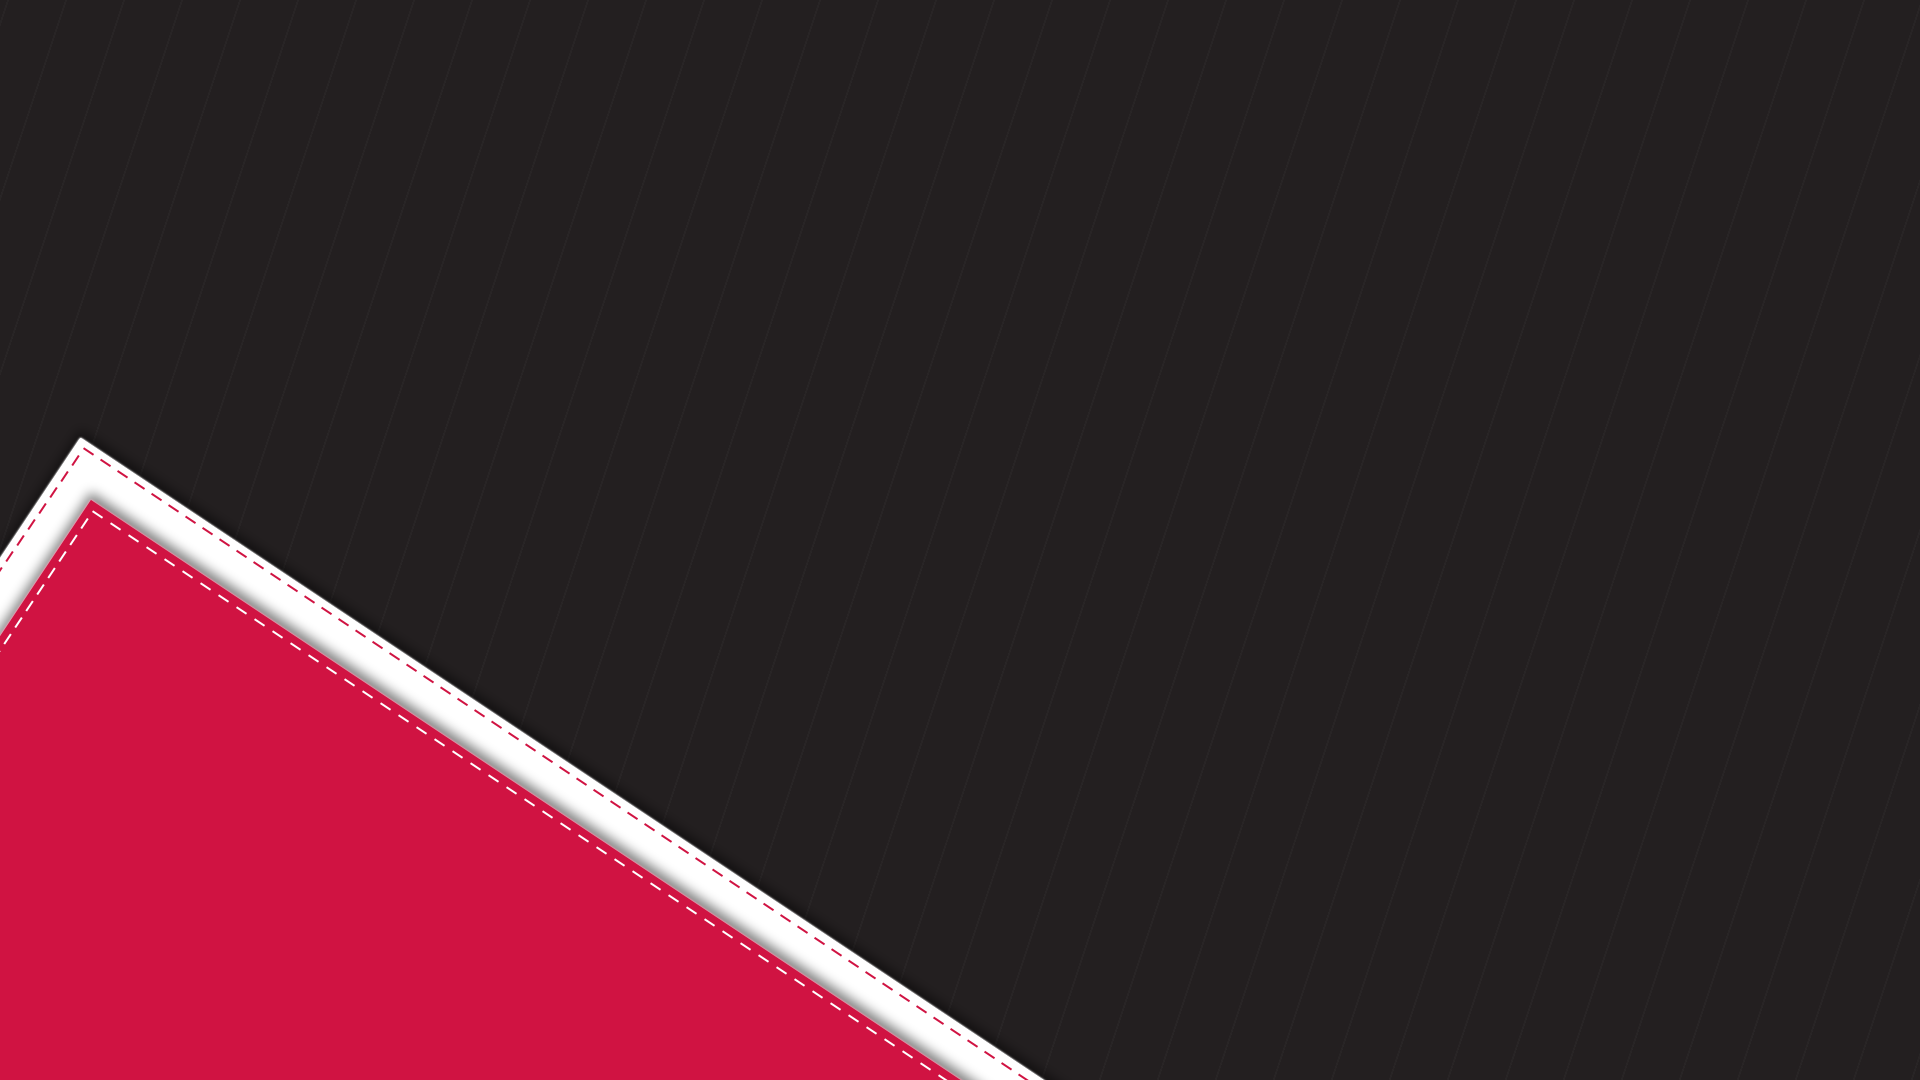 General 1920x1080 minimalism red gray lines simple background